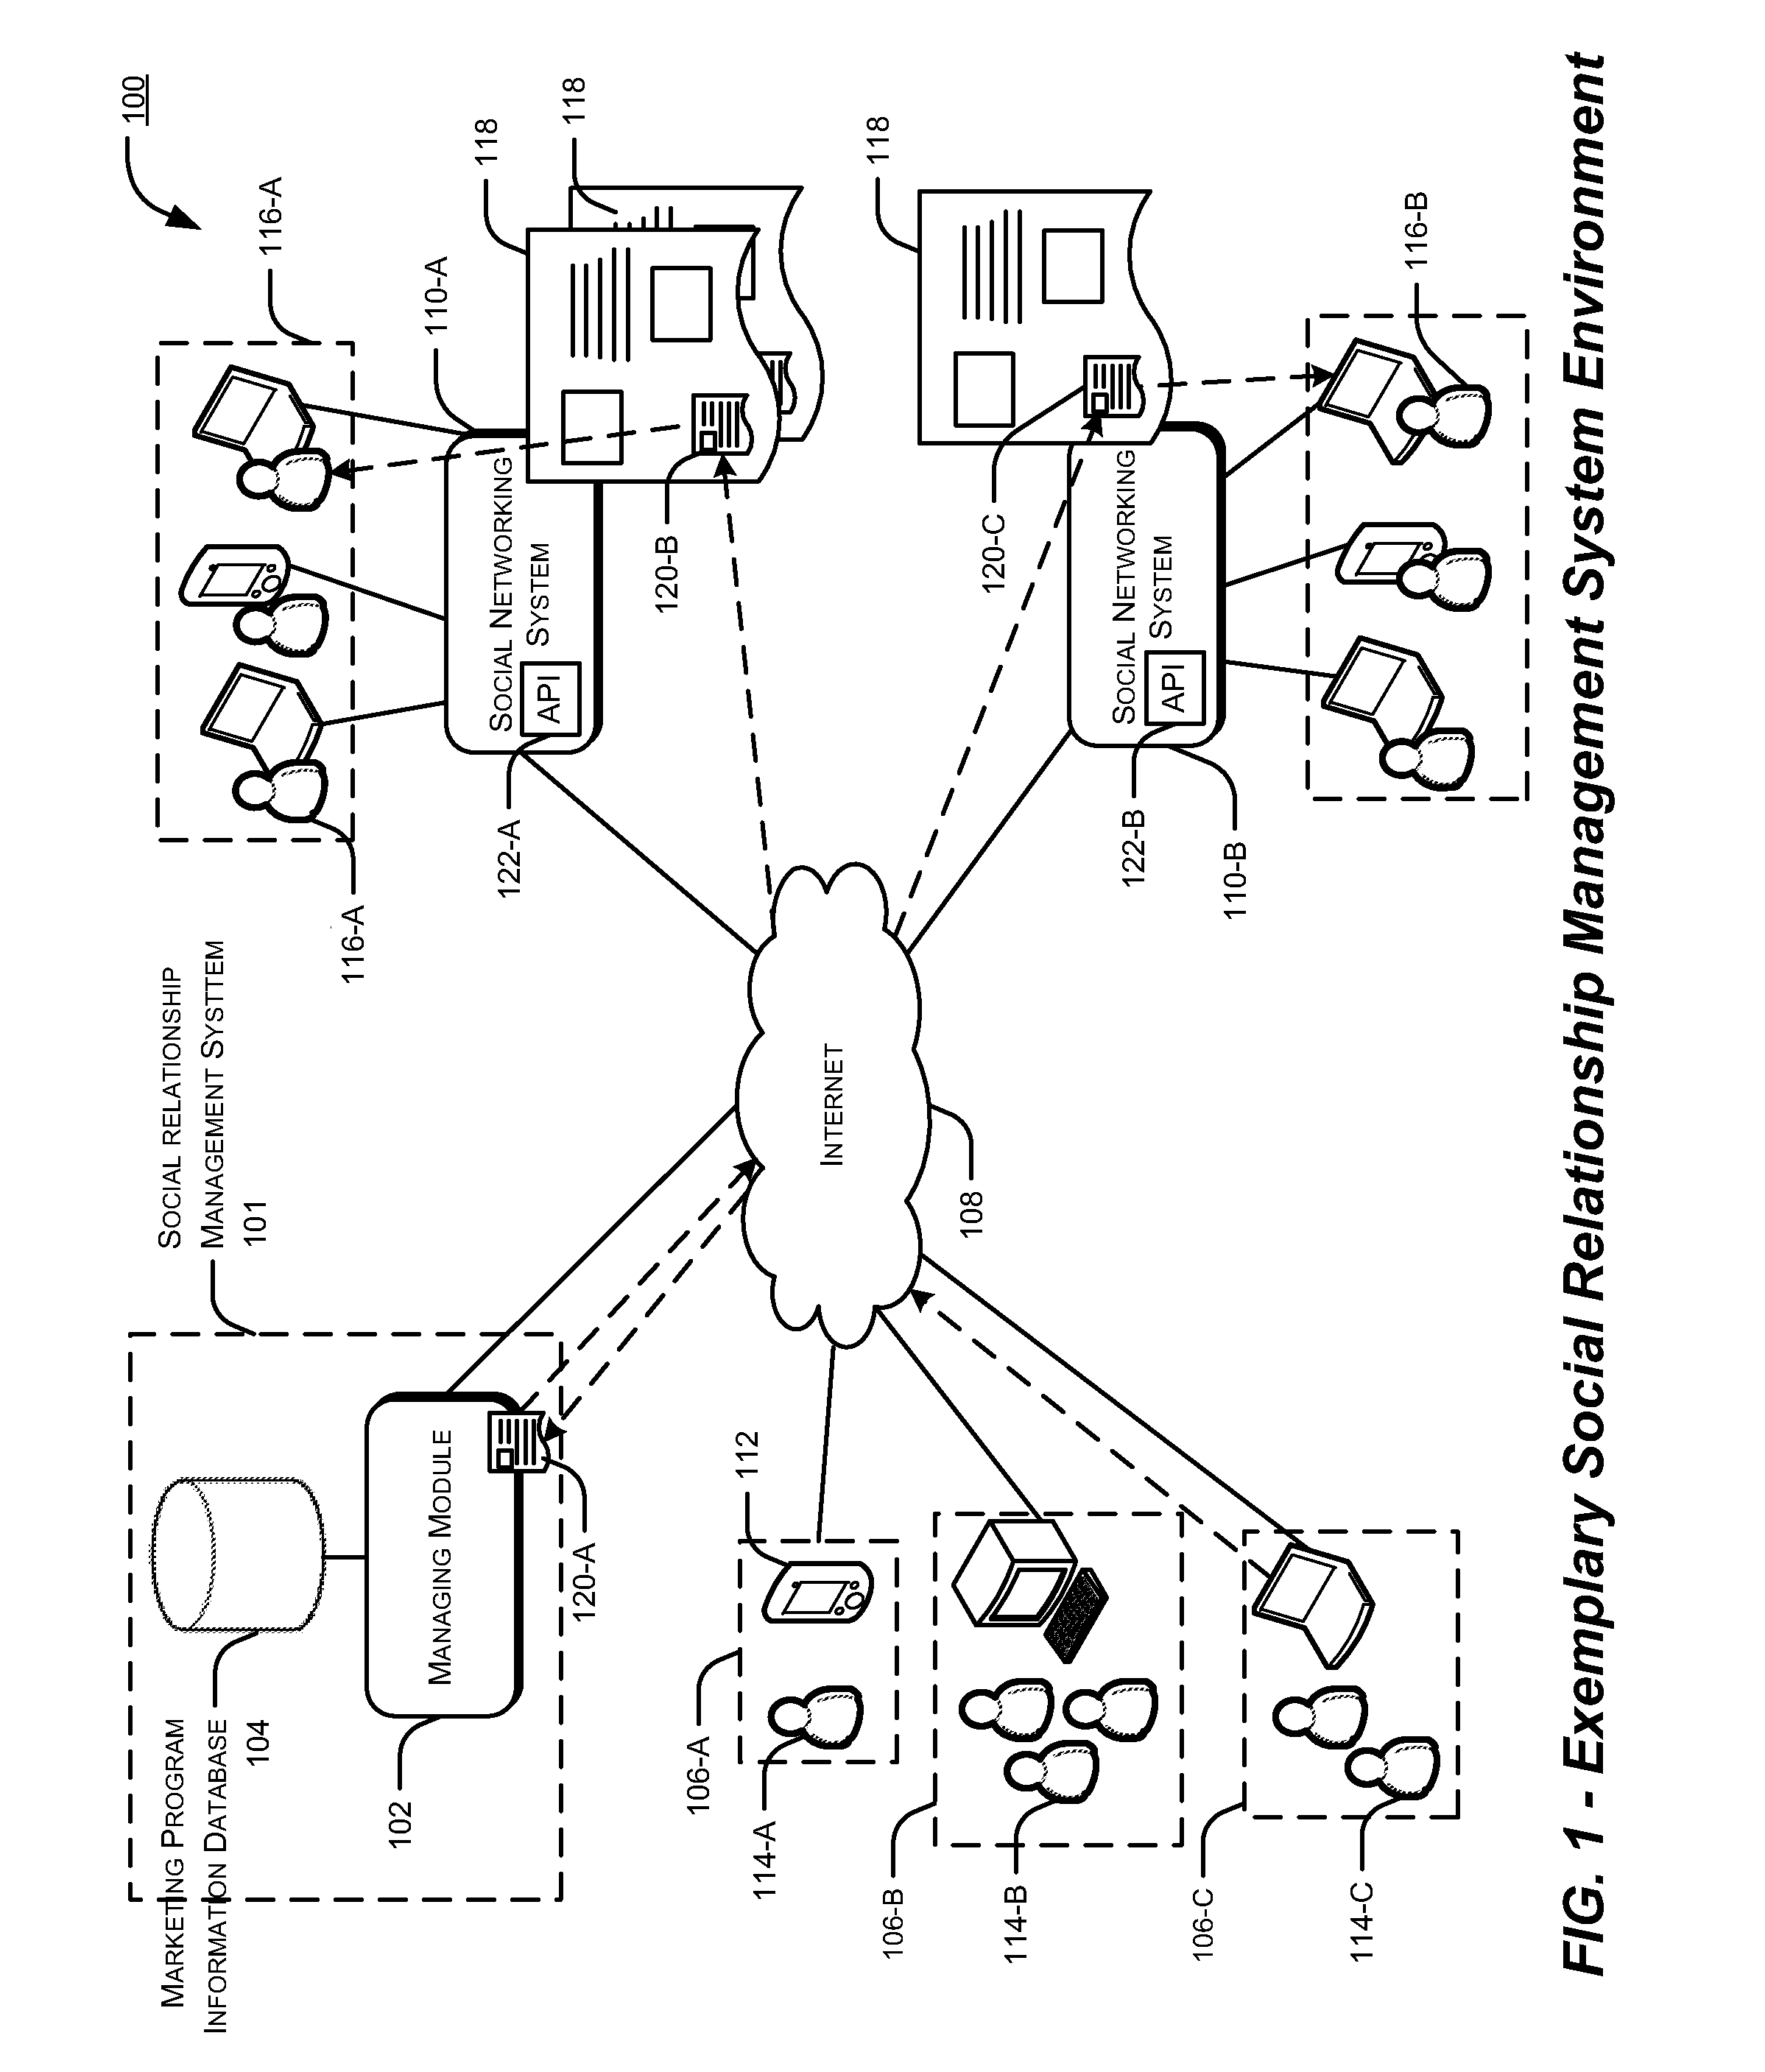 Systems and methods for creating and inserting application media content into social media system displays